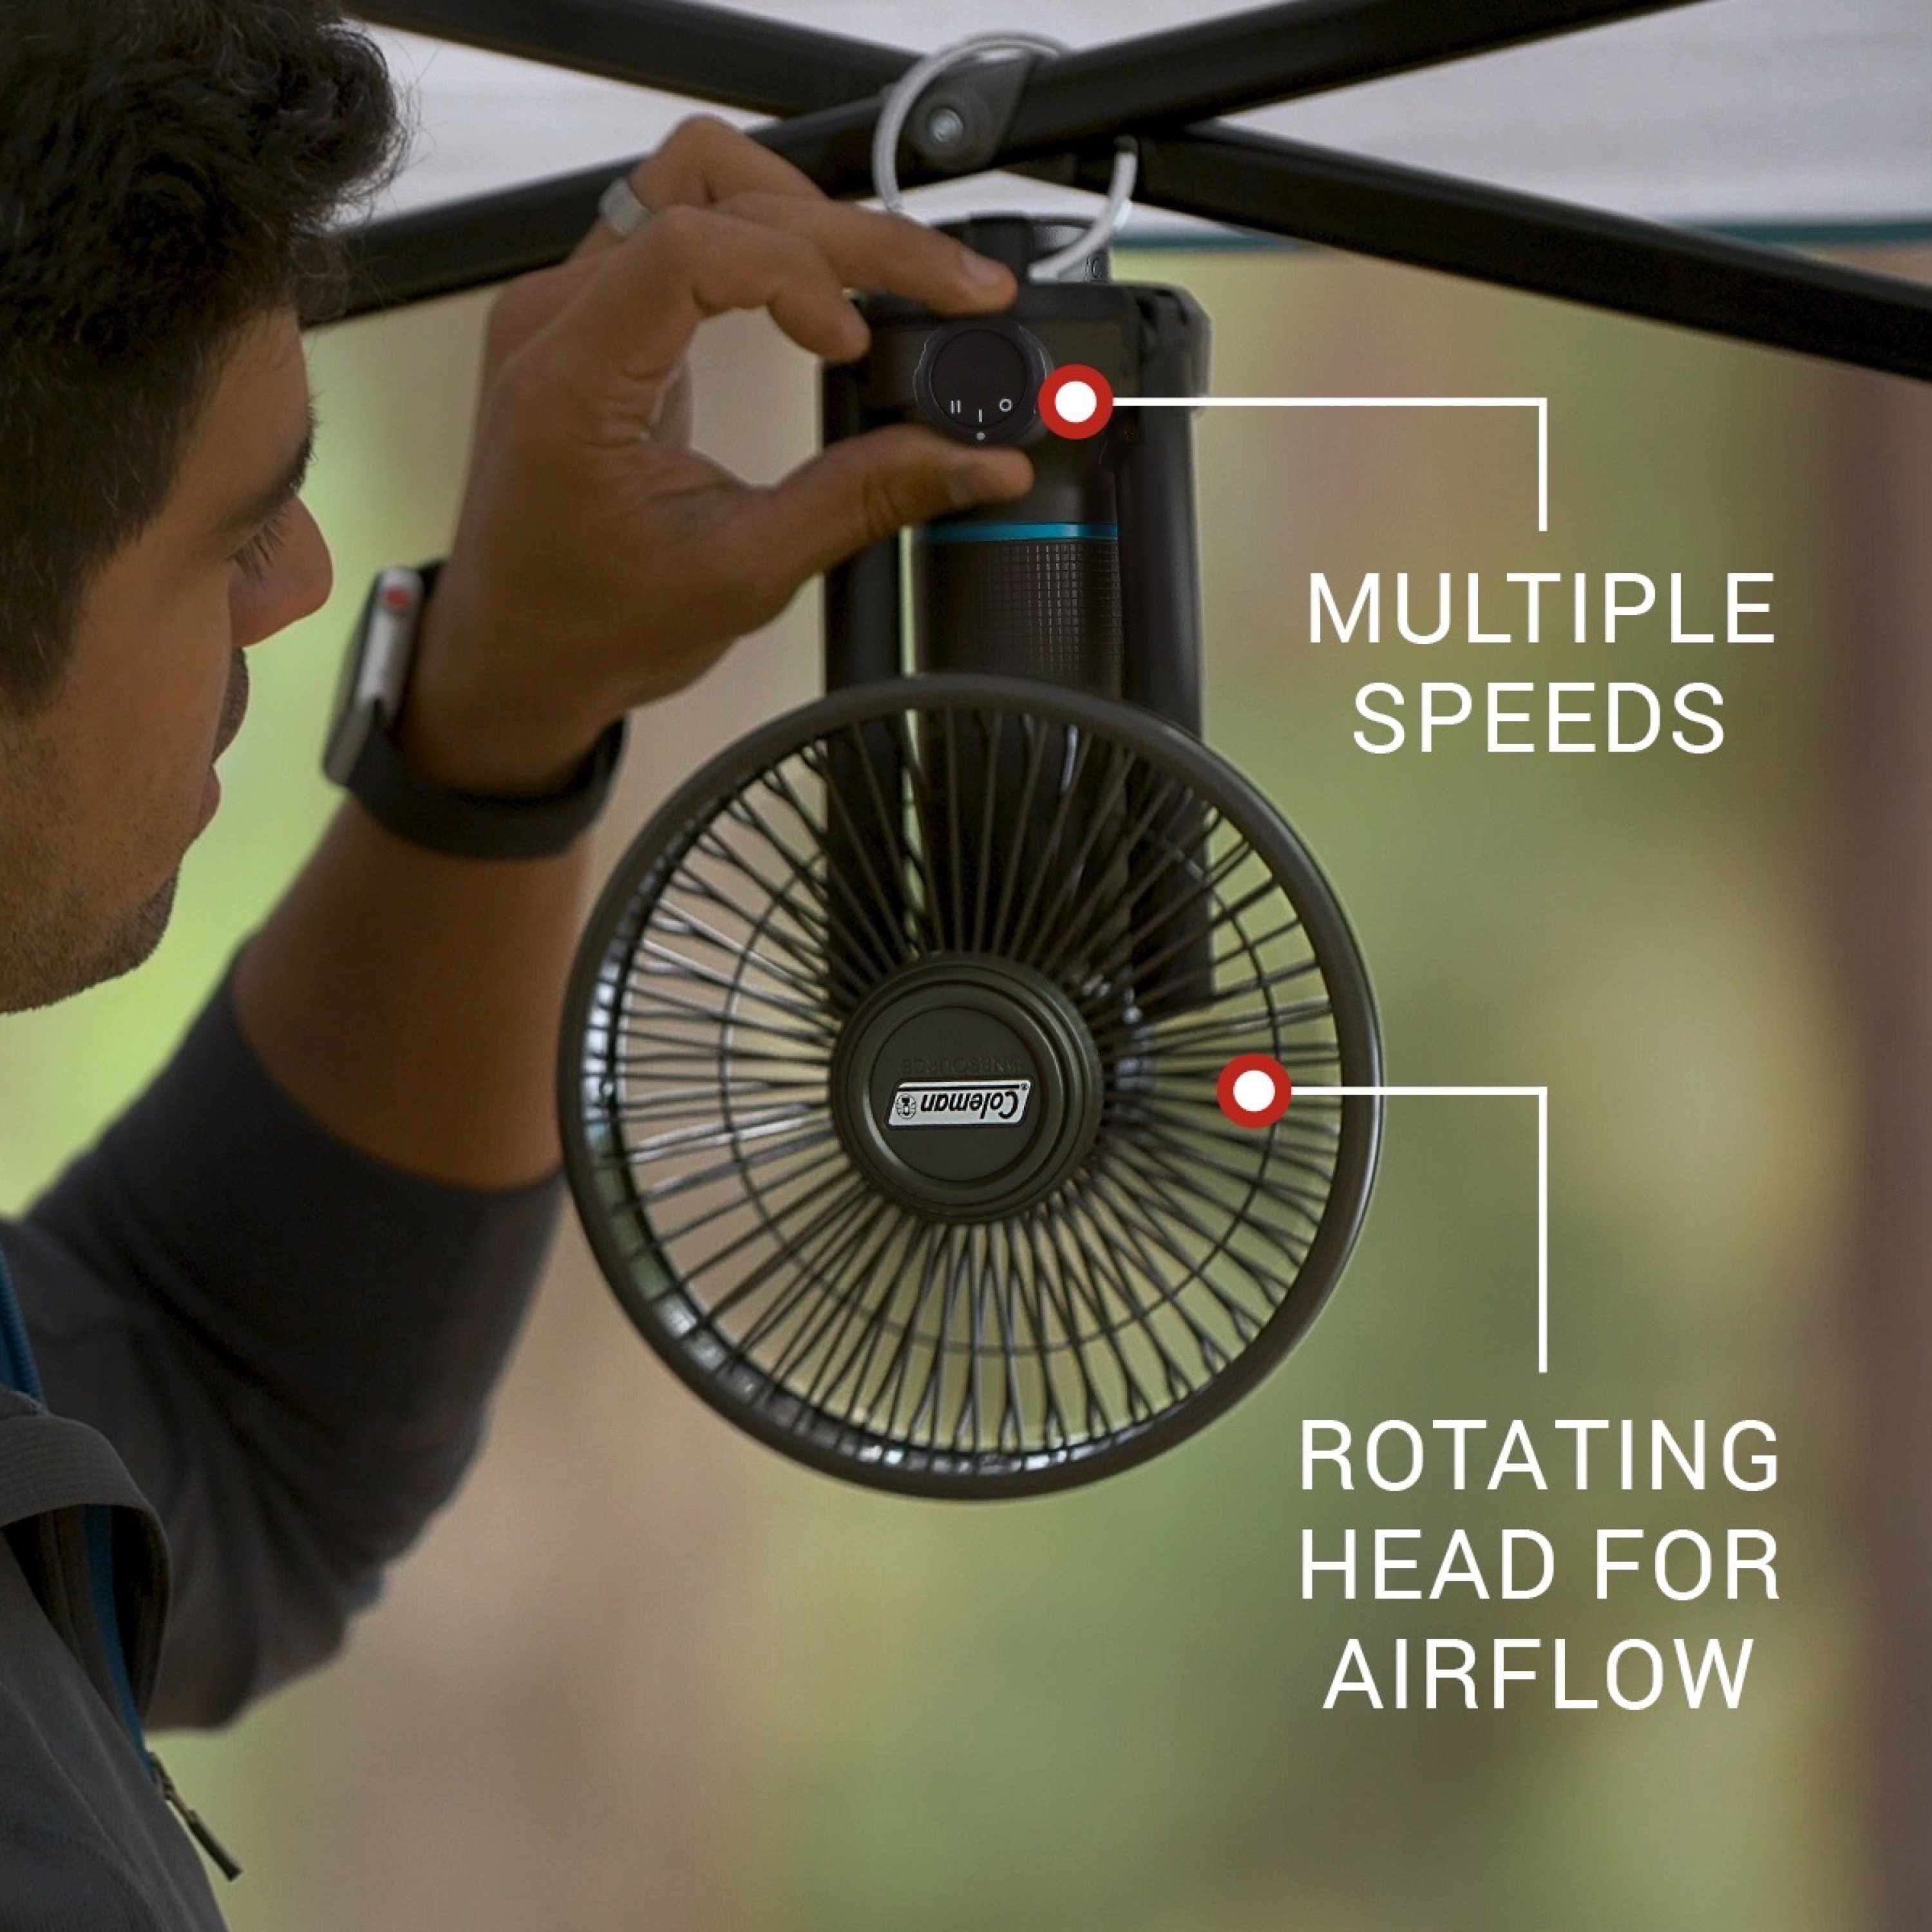 Coleman Onesource Multi-Speed Portable Fan & Rechargeable Battery, Black, Built in Flash Light - image 3 of 8